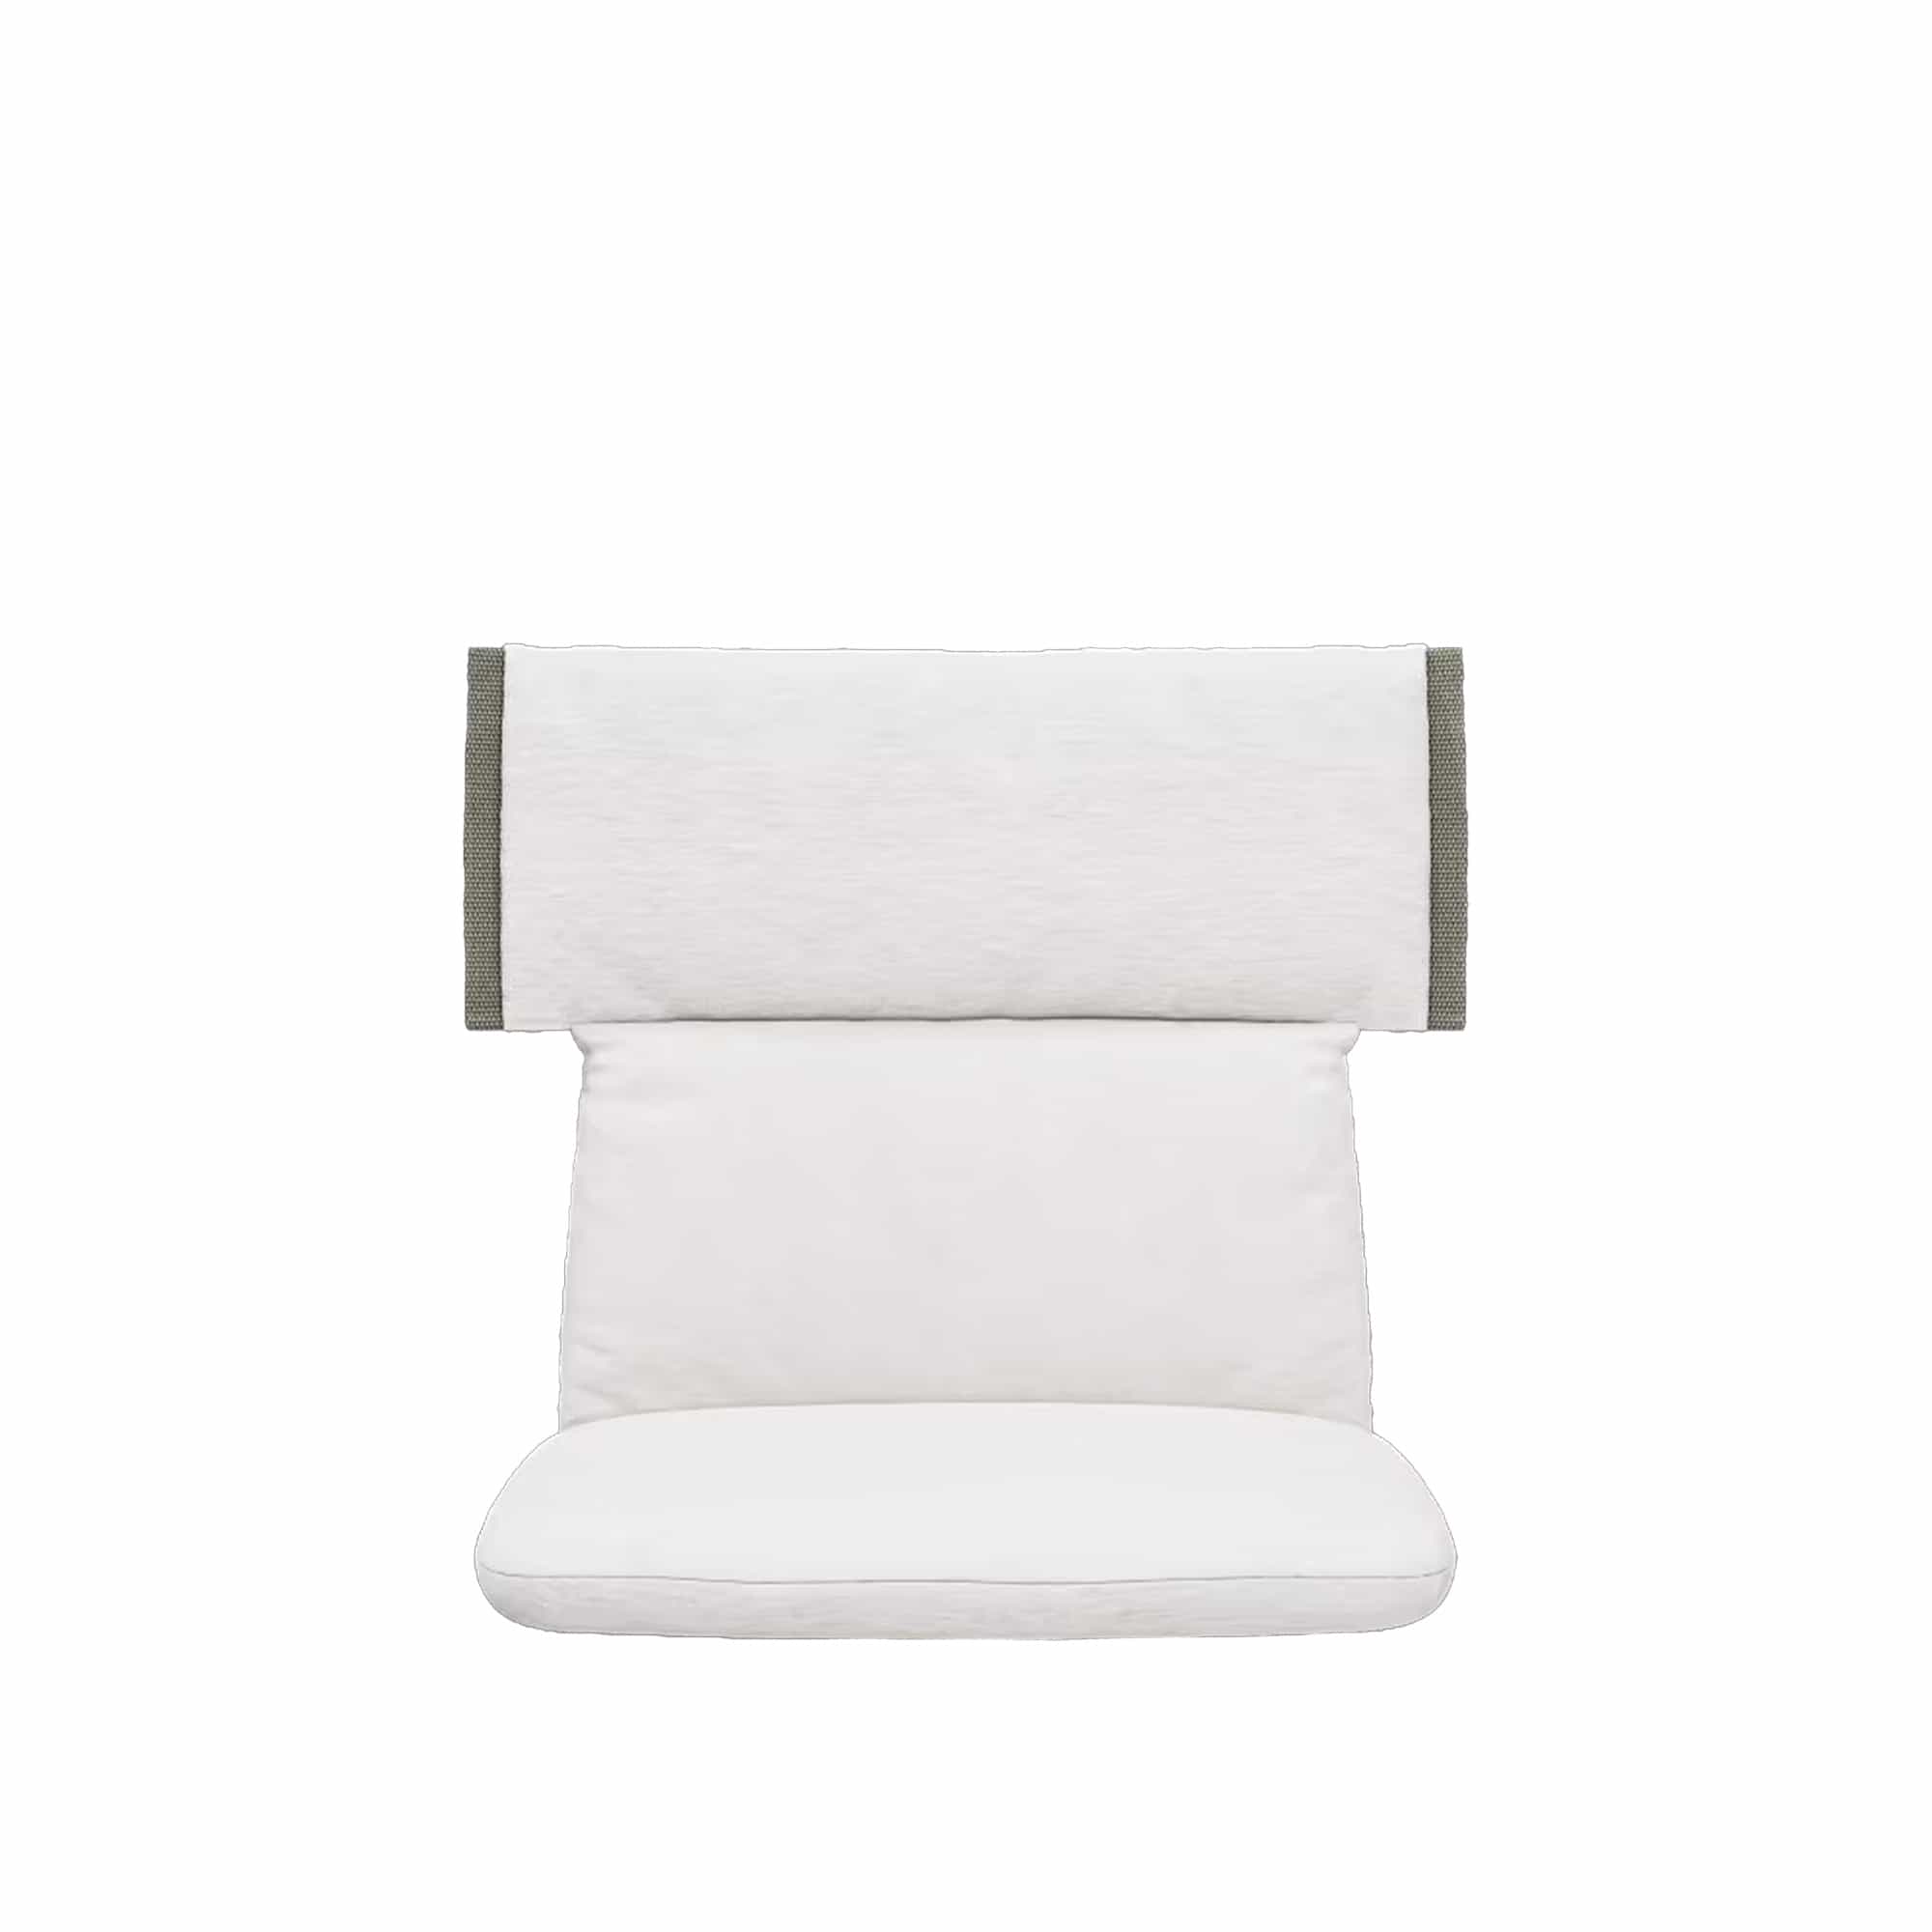 E008 Embrace Outdoor Dining Chair Cushion